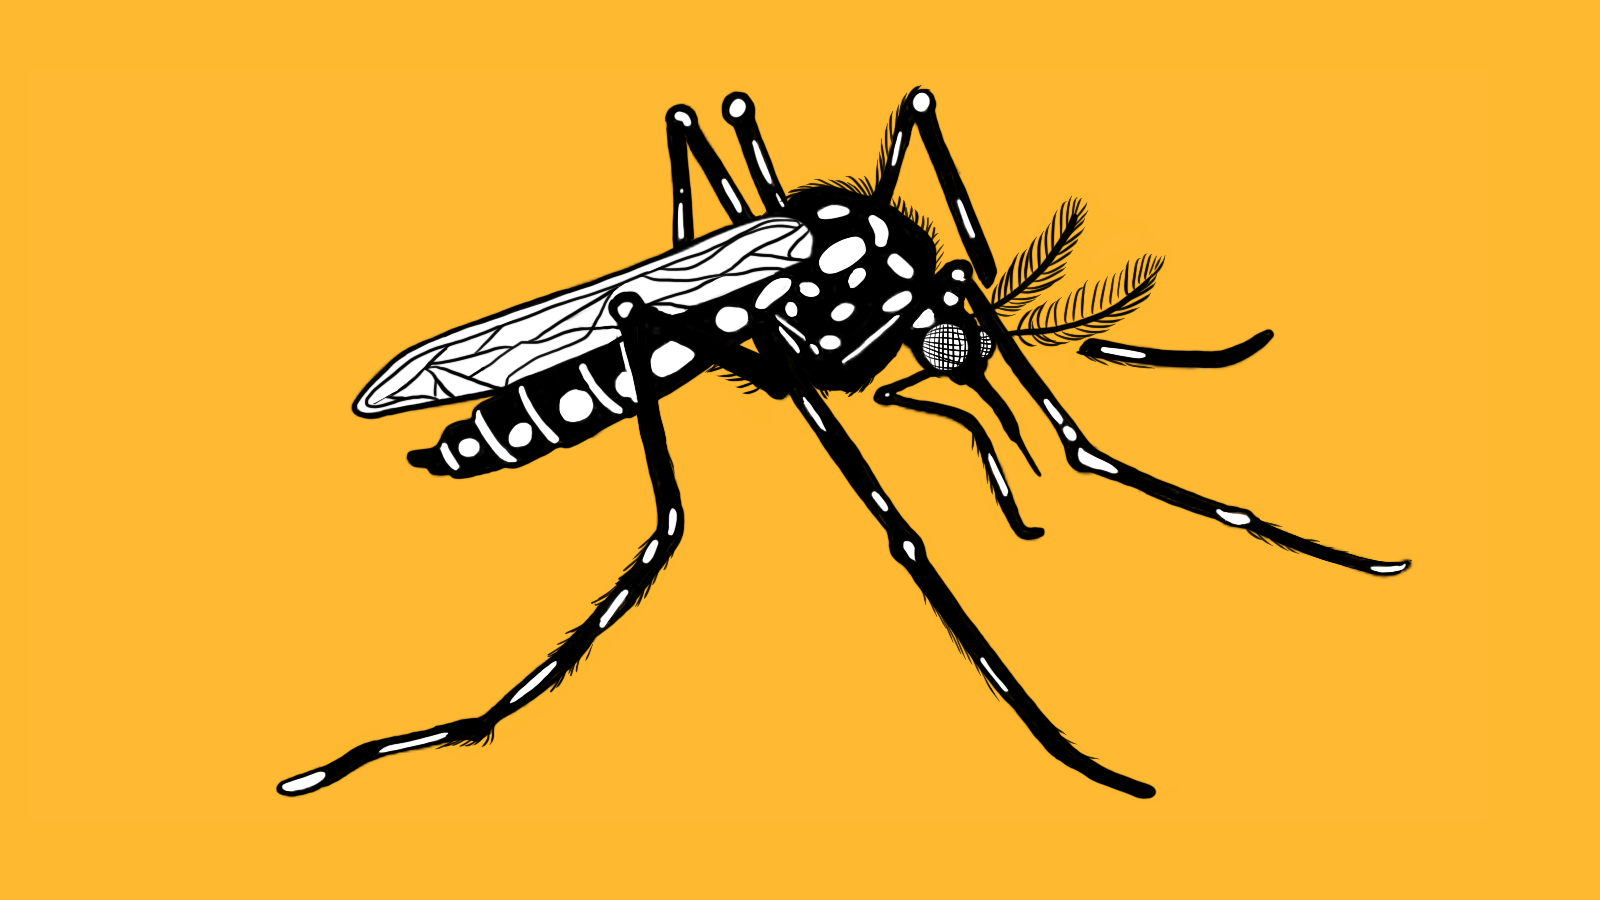 Artistic illustration of yellow fever mosquito